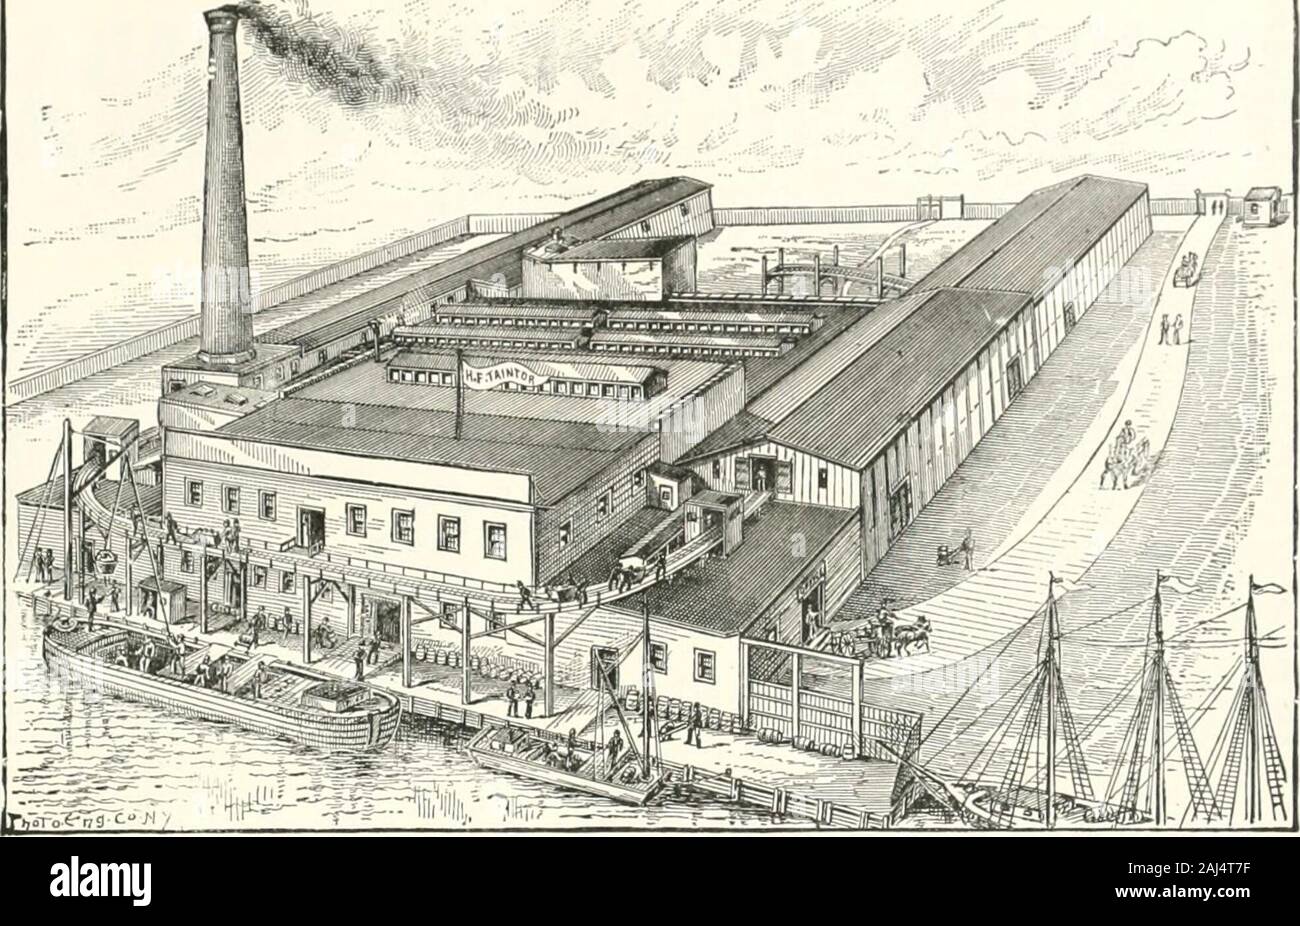 India rubber world . HIGH GRADE Mechanical R^ubber Goods, Mention 7%e India Rubber ^yorl(i vhen uoit write* May I, 1905.] THE INDIA RUBBER WORLD VII. The H. F. Taintor Mfg. Co. are the largest manufacturers of Whiting and EngHsh Cliffstone Paris White inthis country. All grades of Whiting prepared especially for use of Rubber Manufacturers, finelyground and bolted and very dry. The Westminster brand of English Cliffstone Paris White is the finestmade in the world, and is particularly suited to manufacturers of fine Rubber goodsand specialties. Samples can be had by mail. Address No. 200 Water Stock Photo